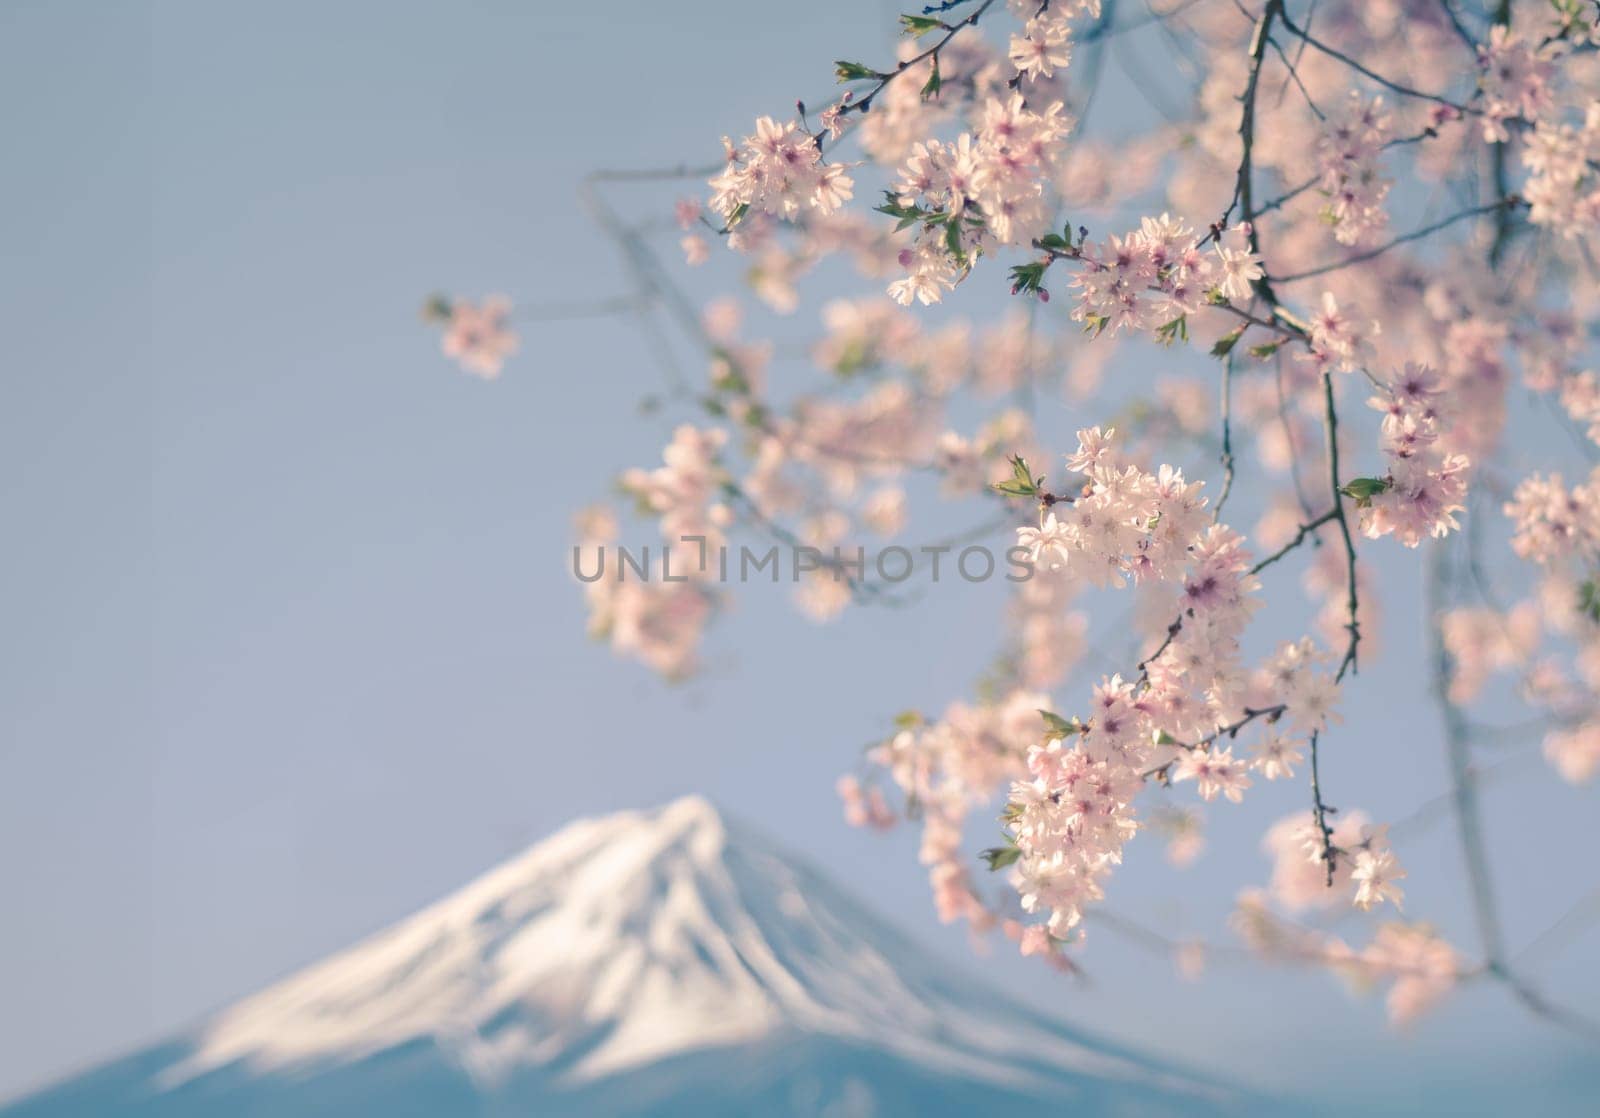 Mount Fuji Framed With Cherry Blossom by mrdoomits